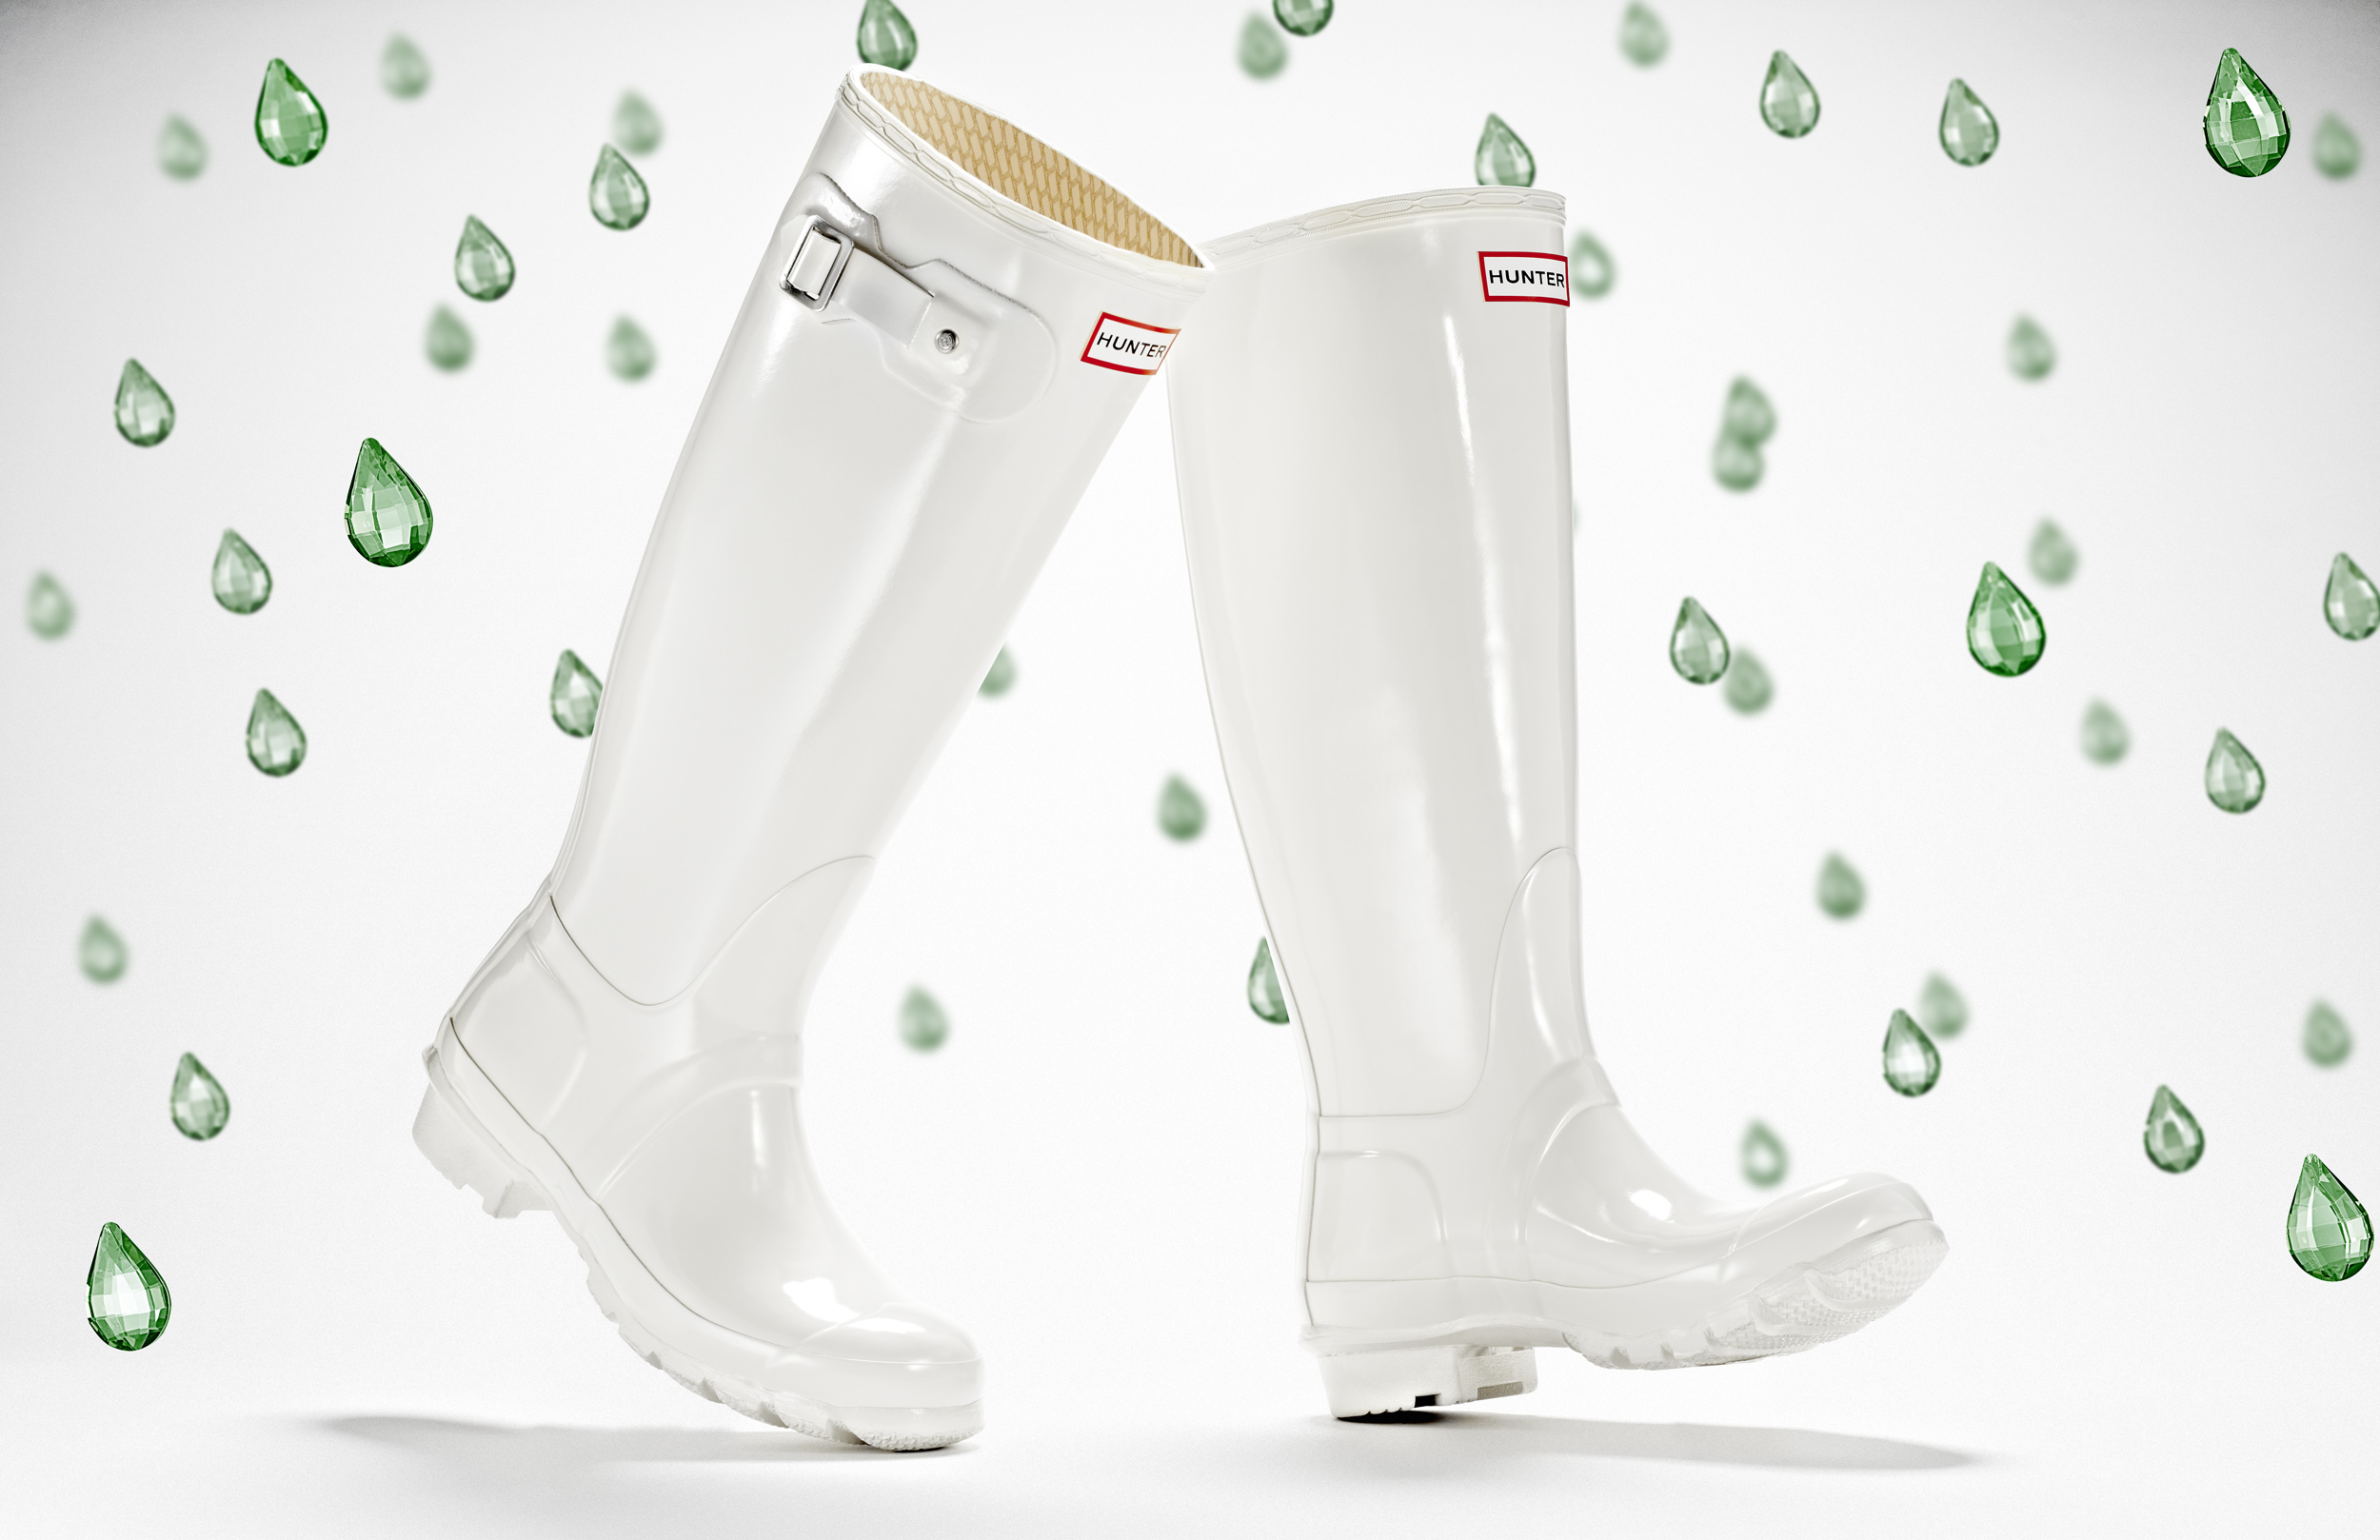 advertising still life photograph of white hunter boots surrounded by green jewel raindrops